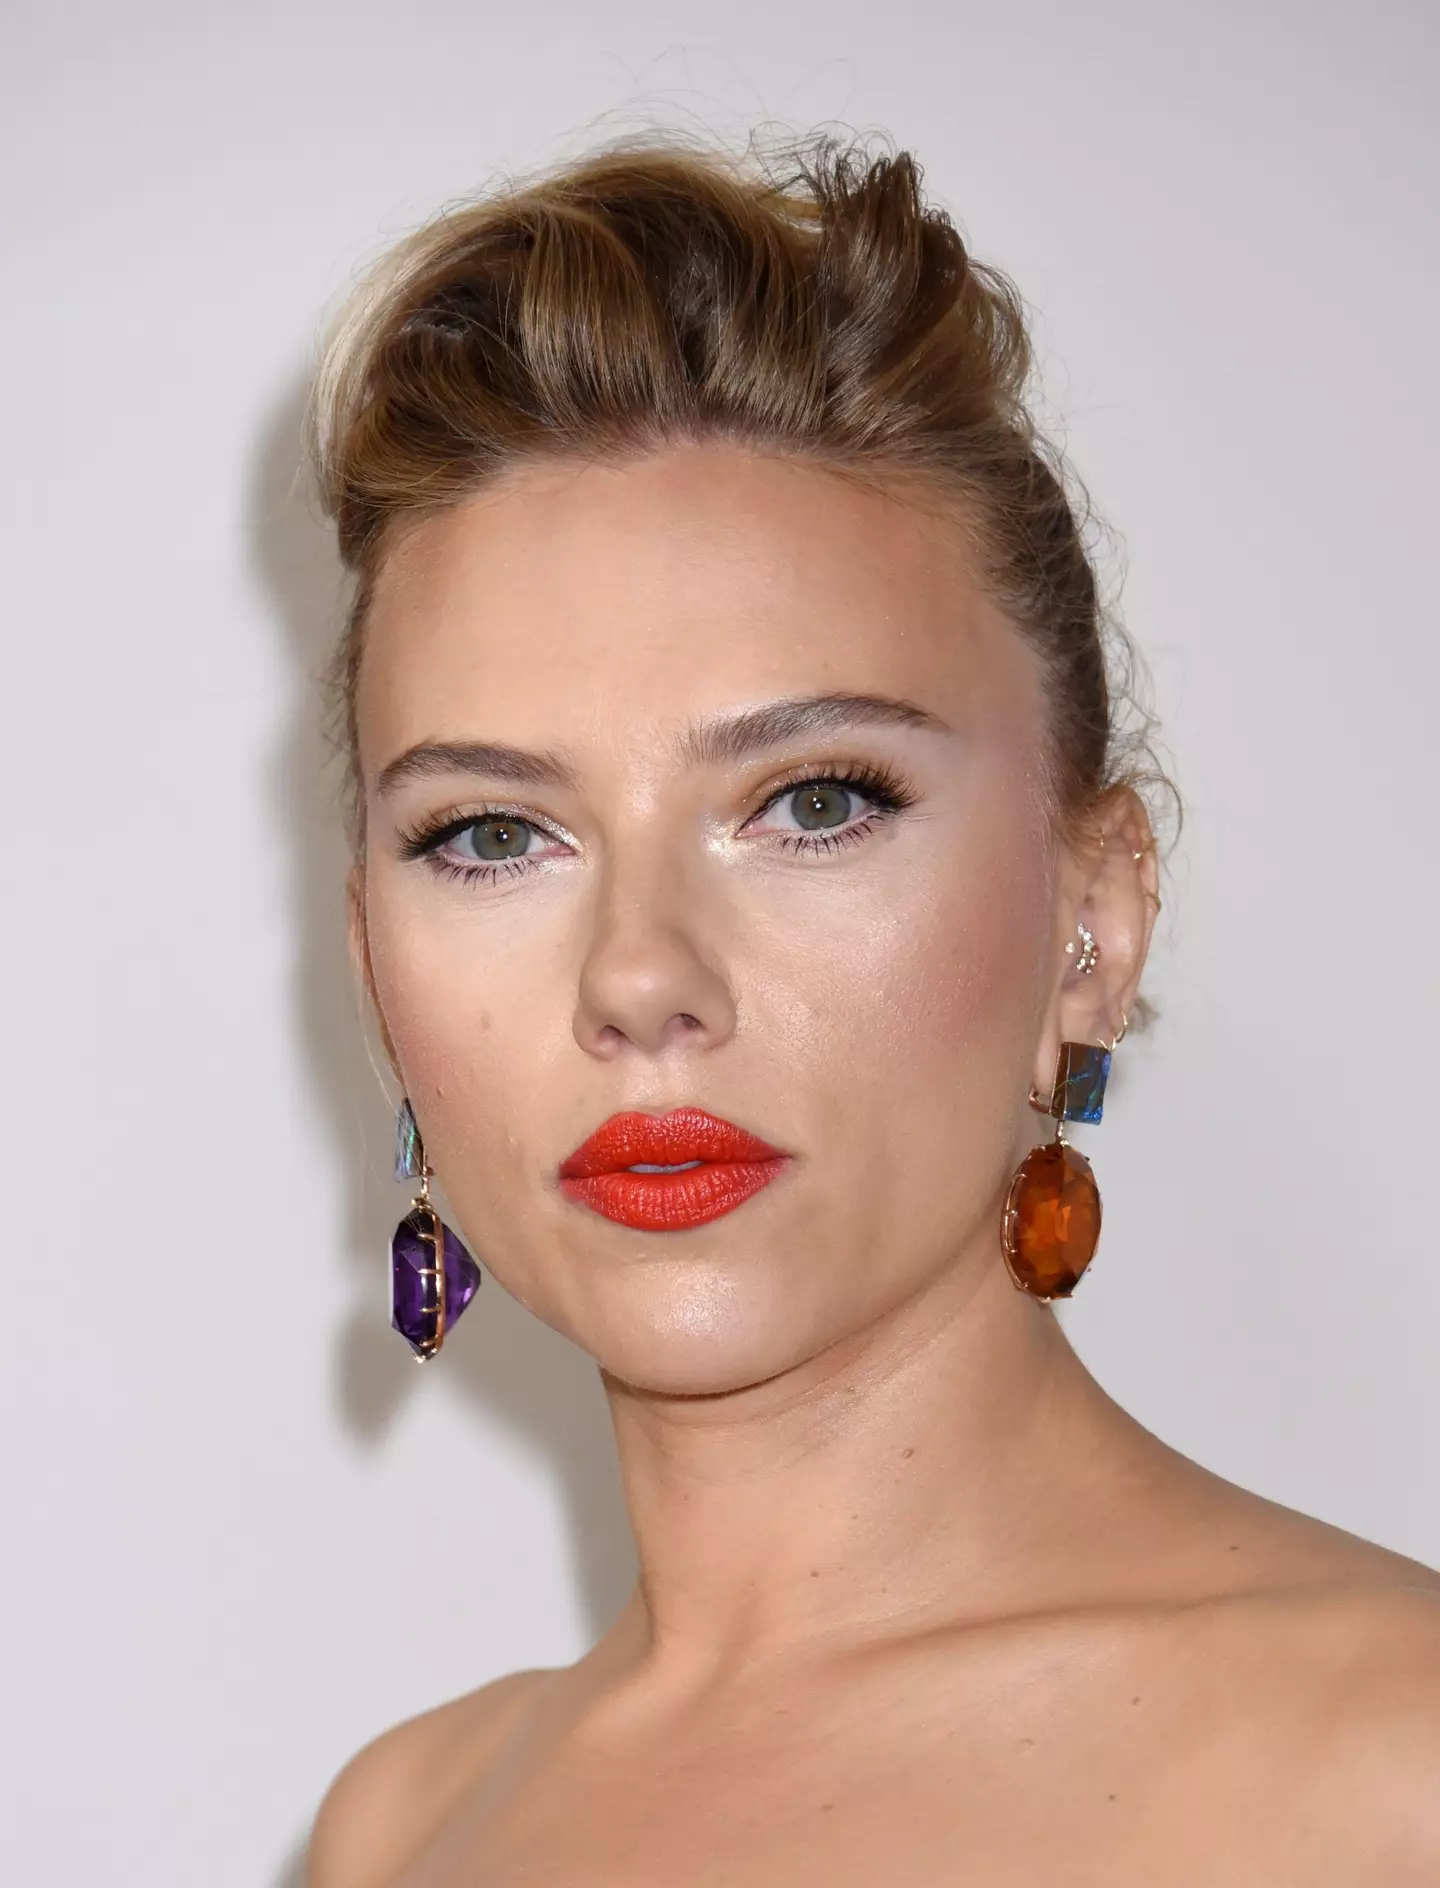 Johansson made an appearance on her MCU fellow co-star, Paltrow's popular GOOP podcast.